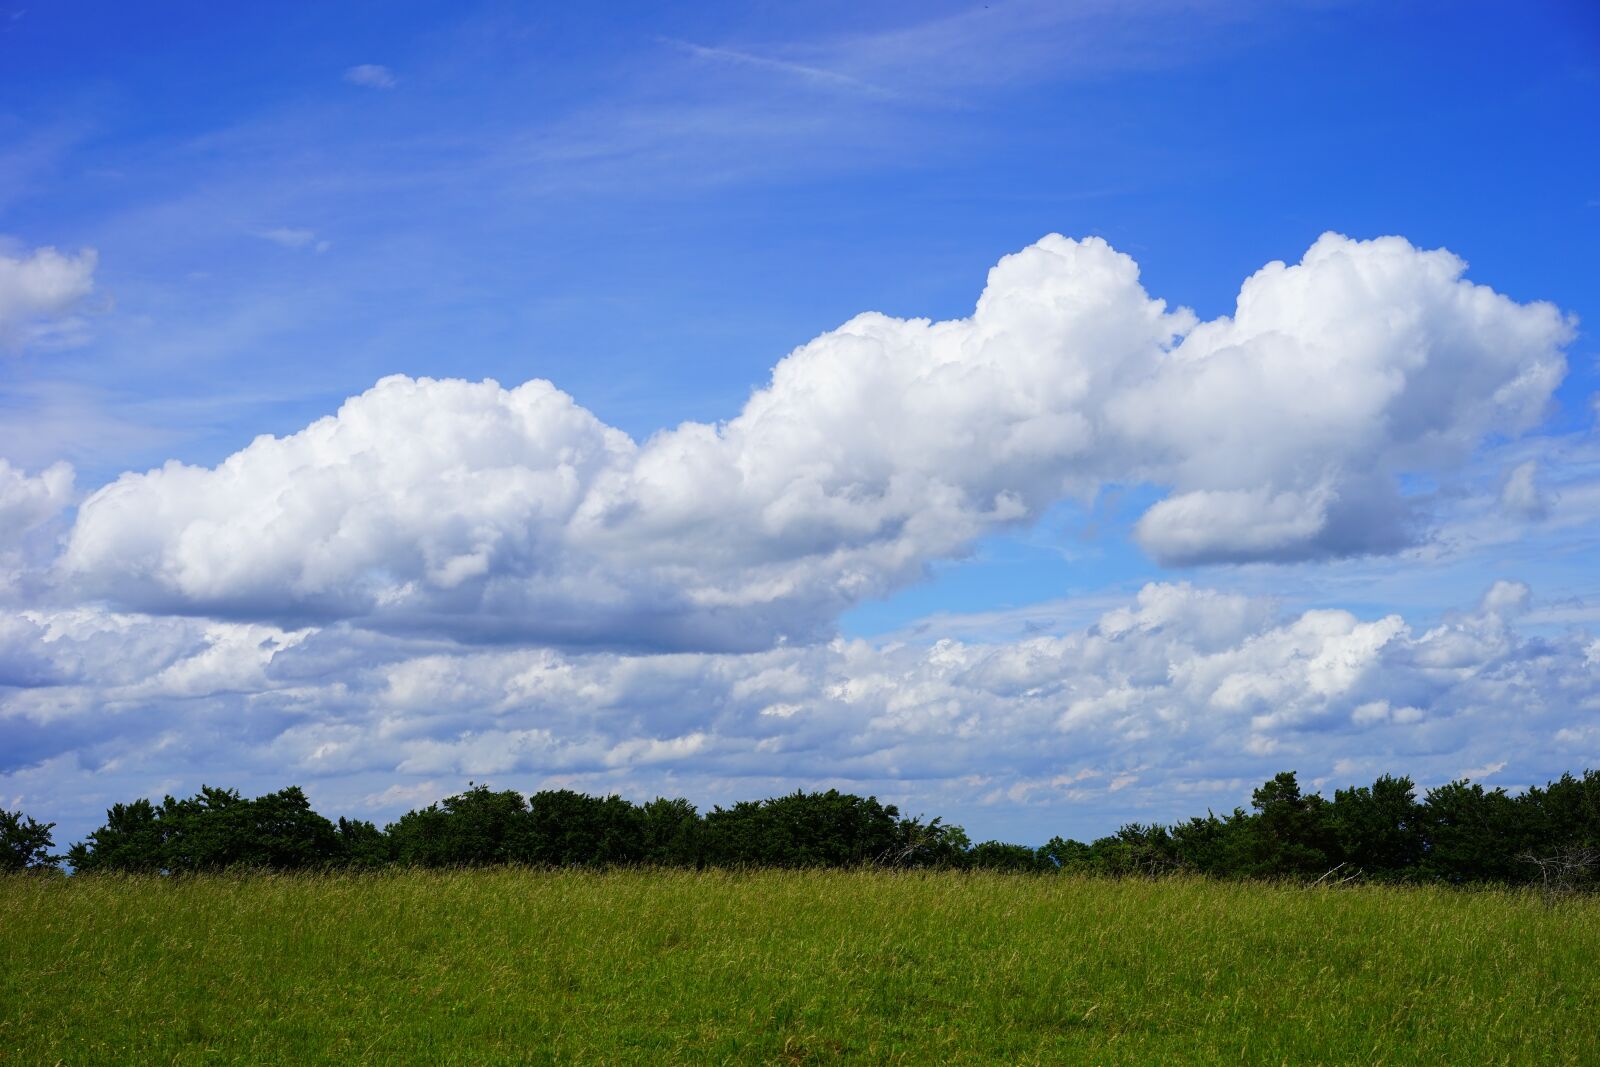 Sony a7 sample photo. Clouds, cloud formations, heathland photography